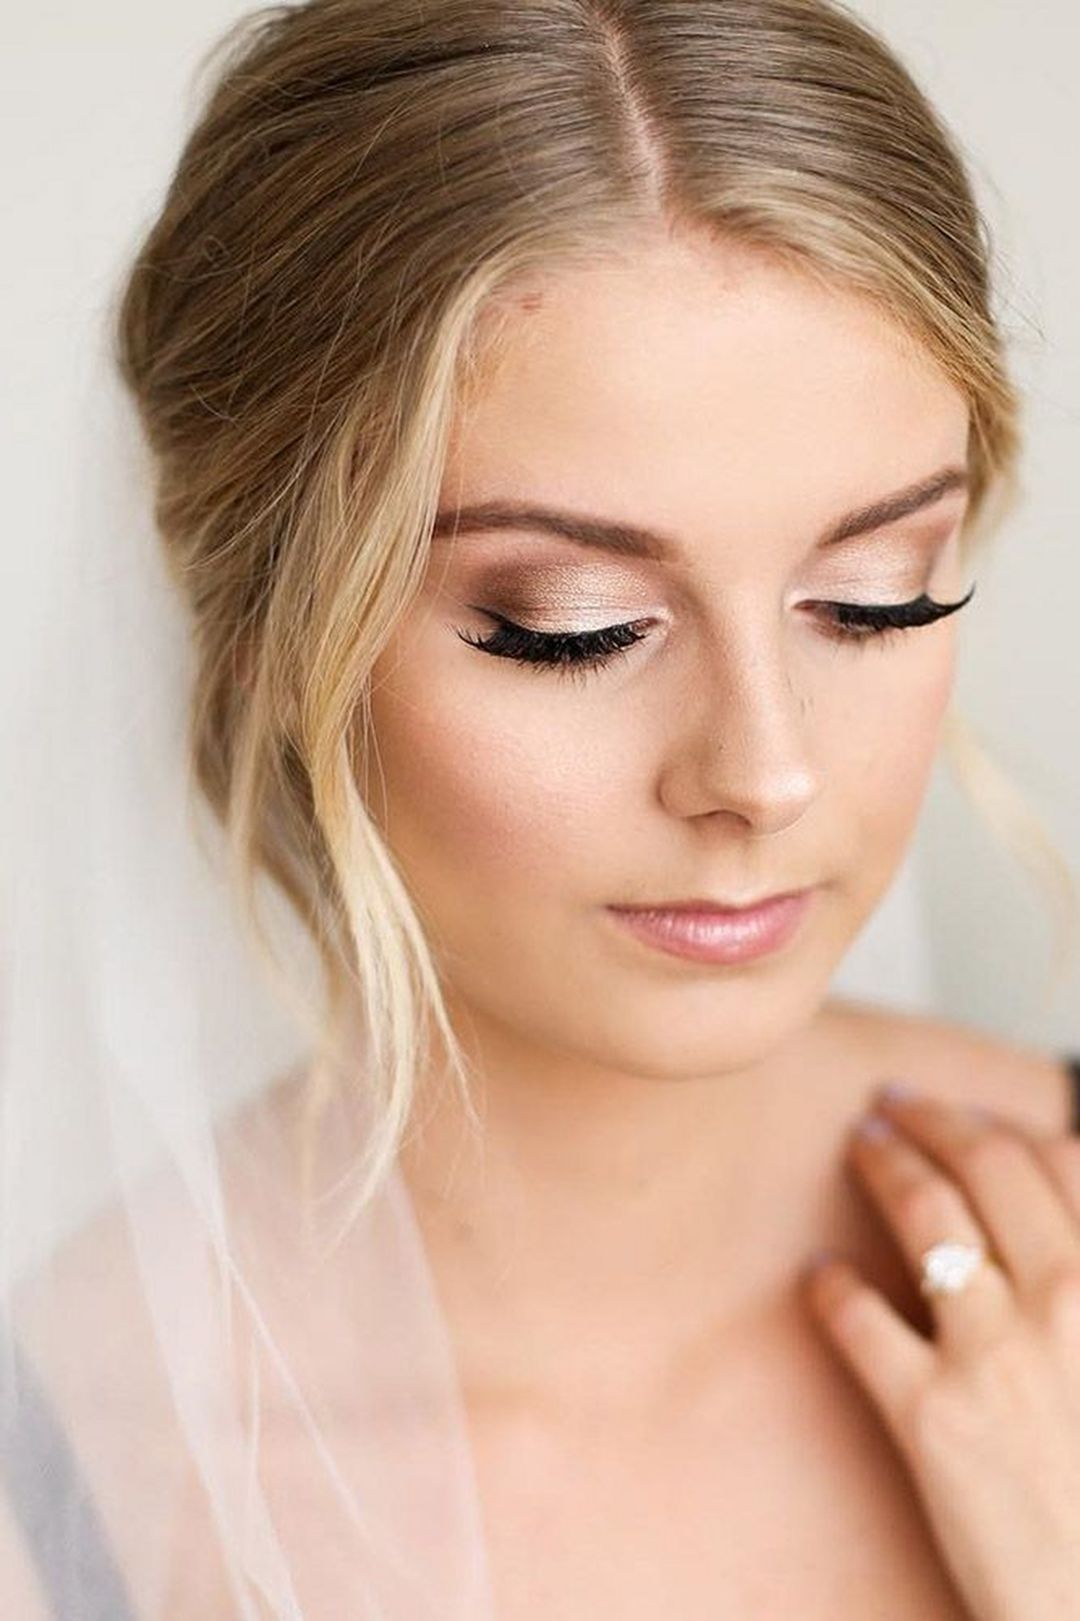 25+ More Look Pretty Ideas With Natural Makeup -   19 makeup Looks wedding ideas